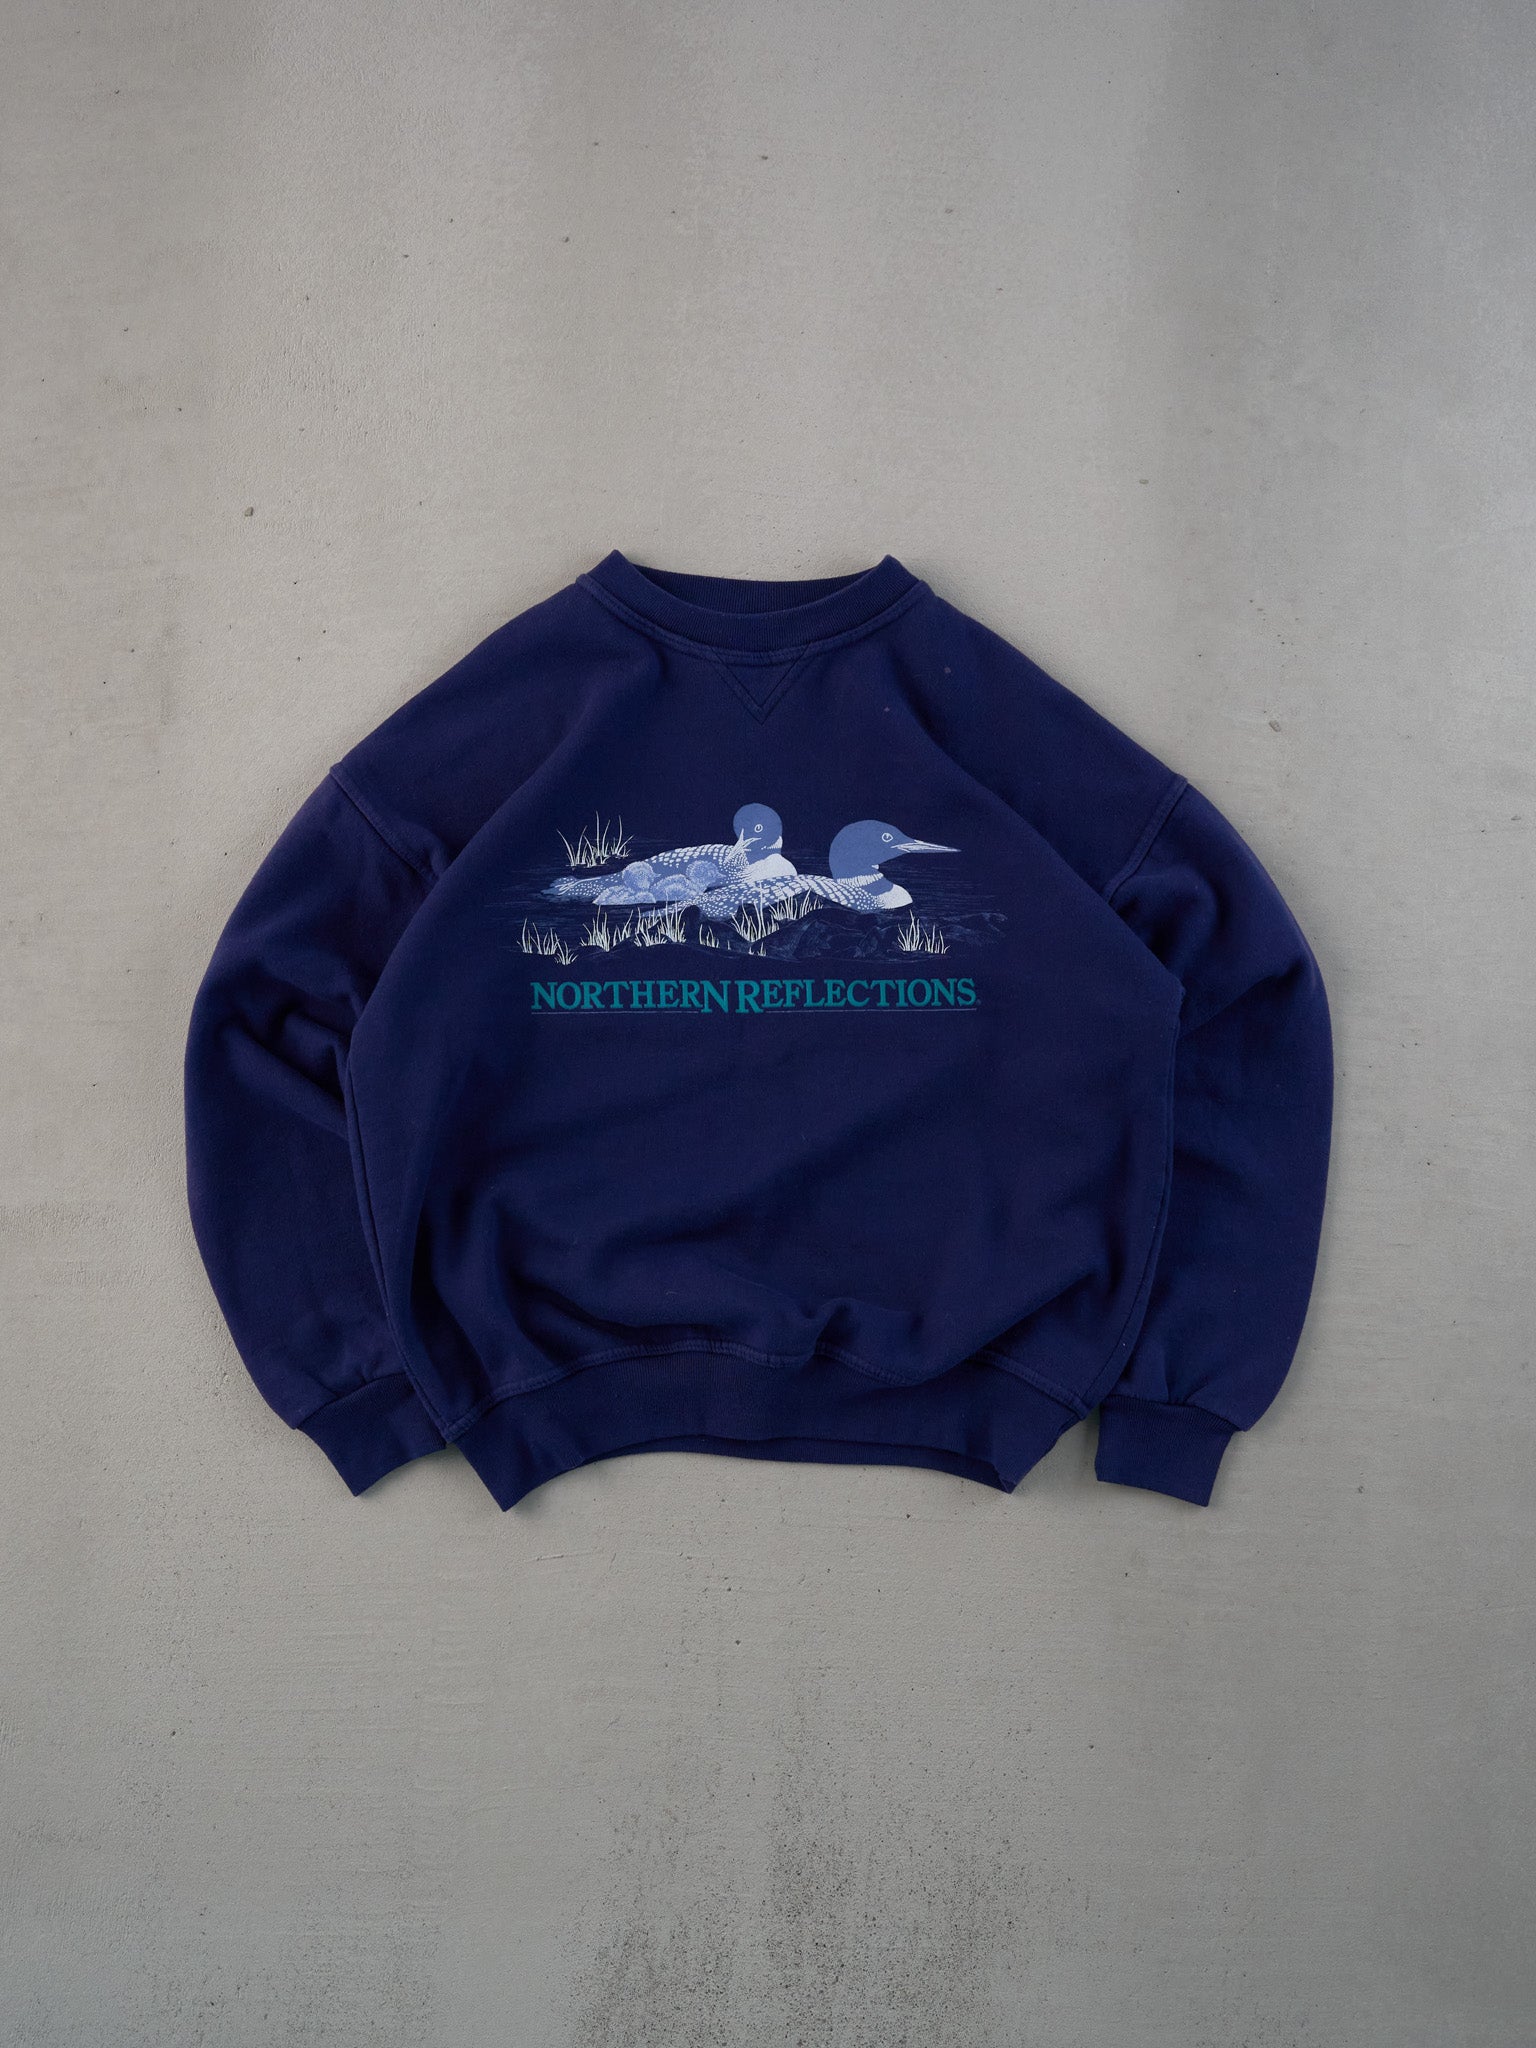 Vintage 90s Navy Blue Northern Reflections Graphic Crewneck (M)